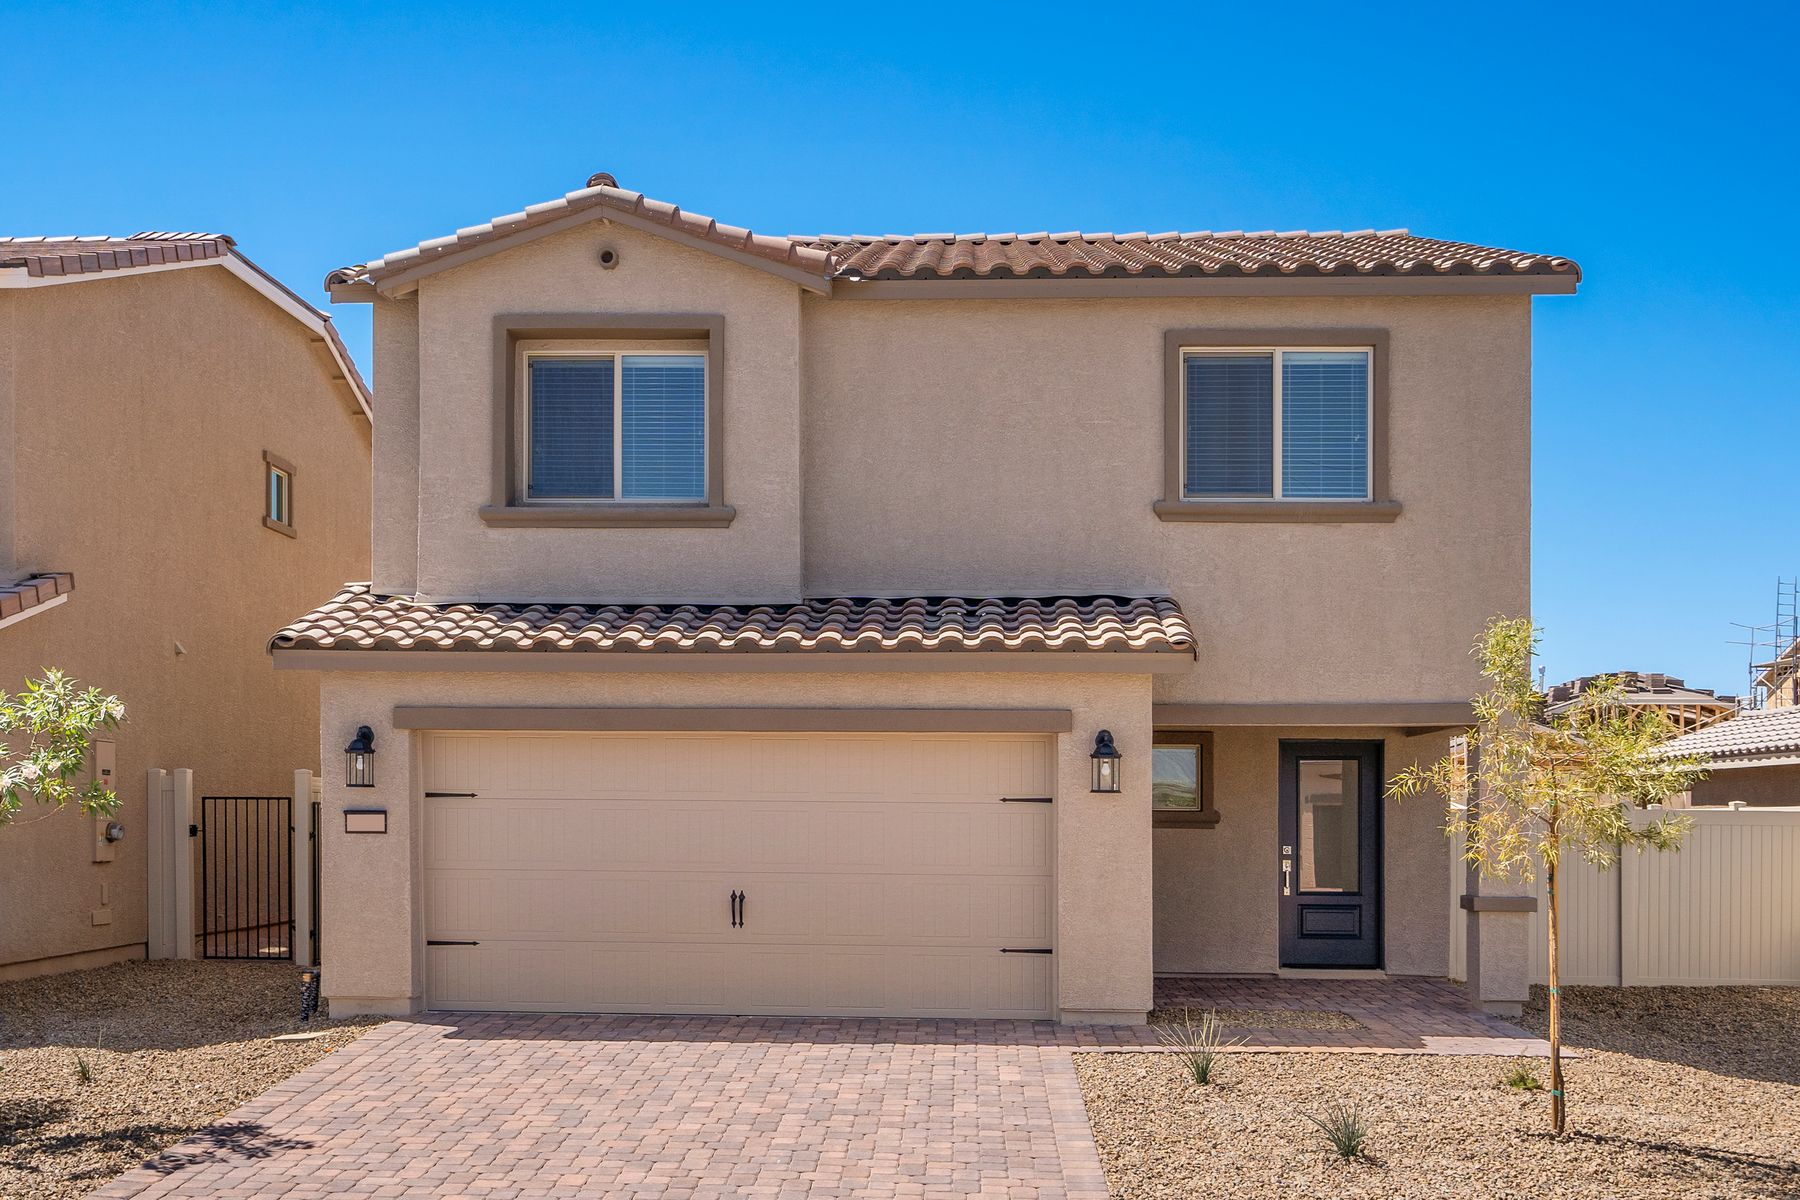 Hollywood Springs by LGI Homes:The Hawthorne is a beautiful 3 bedroom, 2.5 bathroom home.